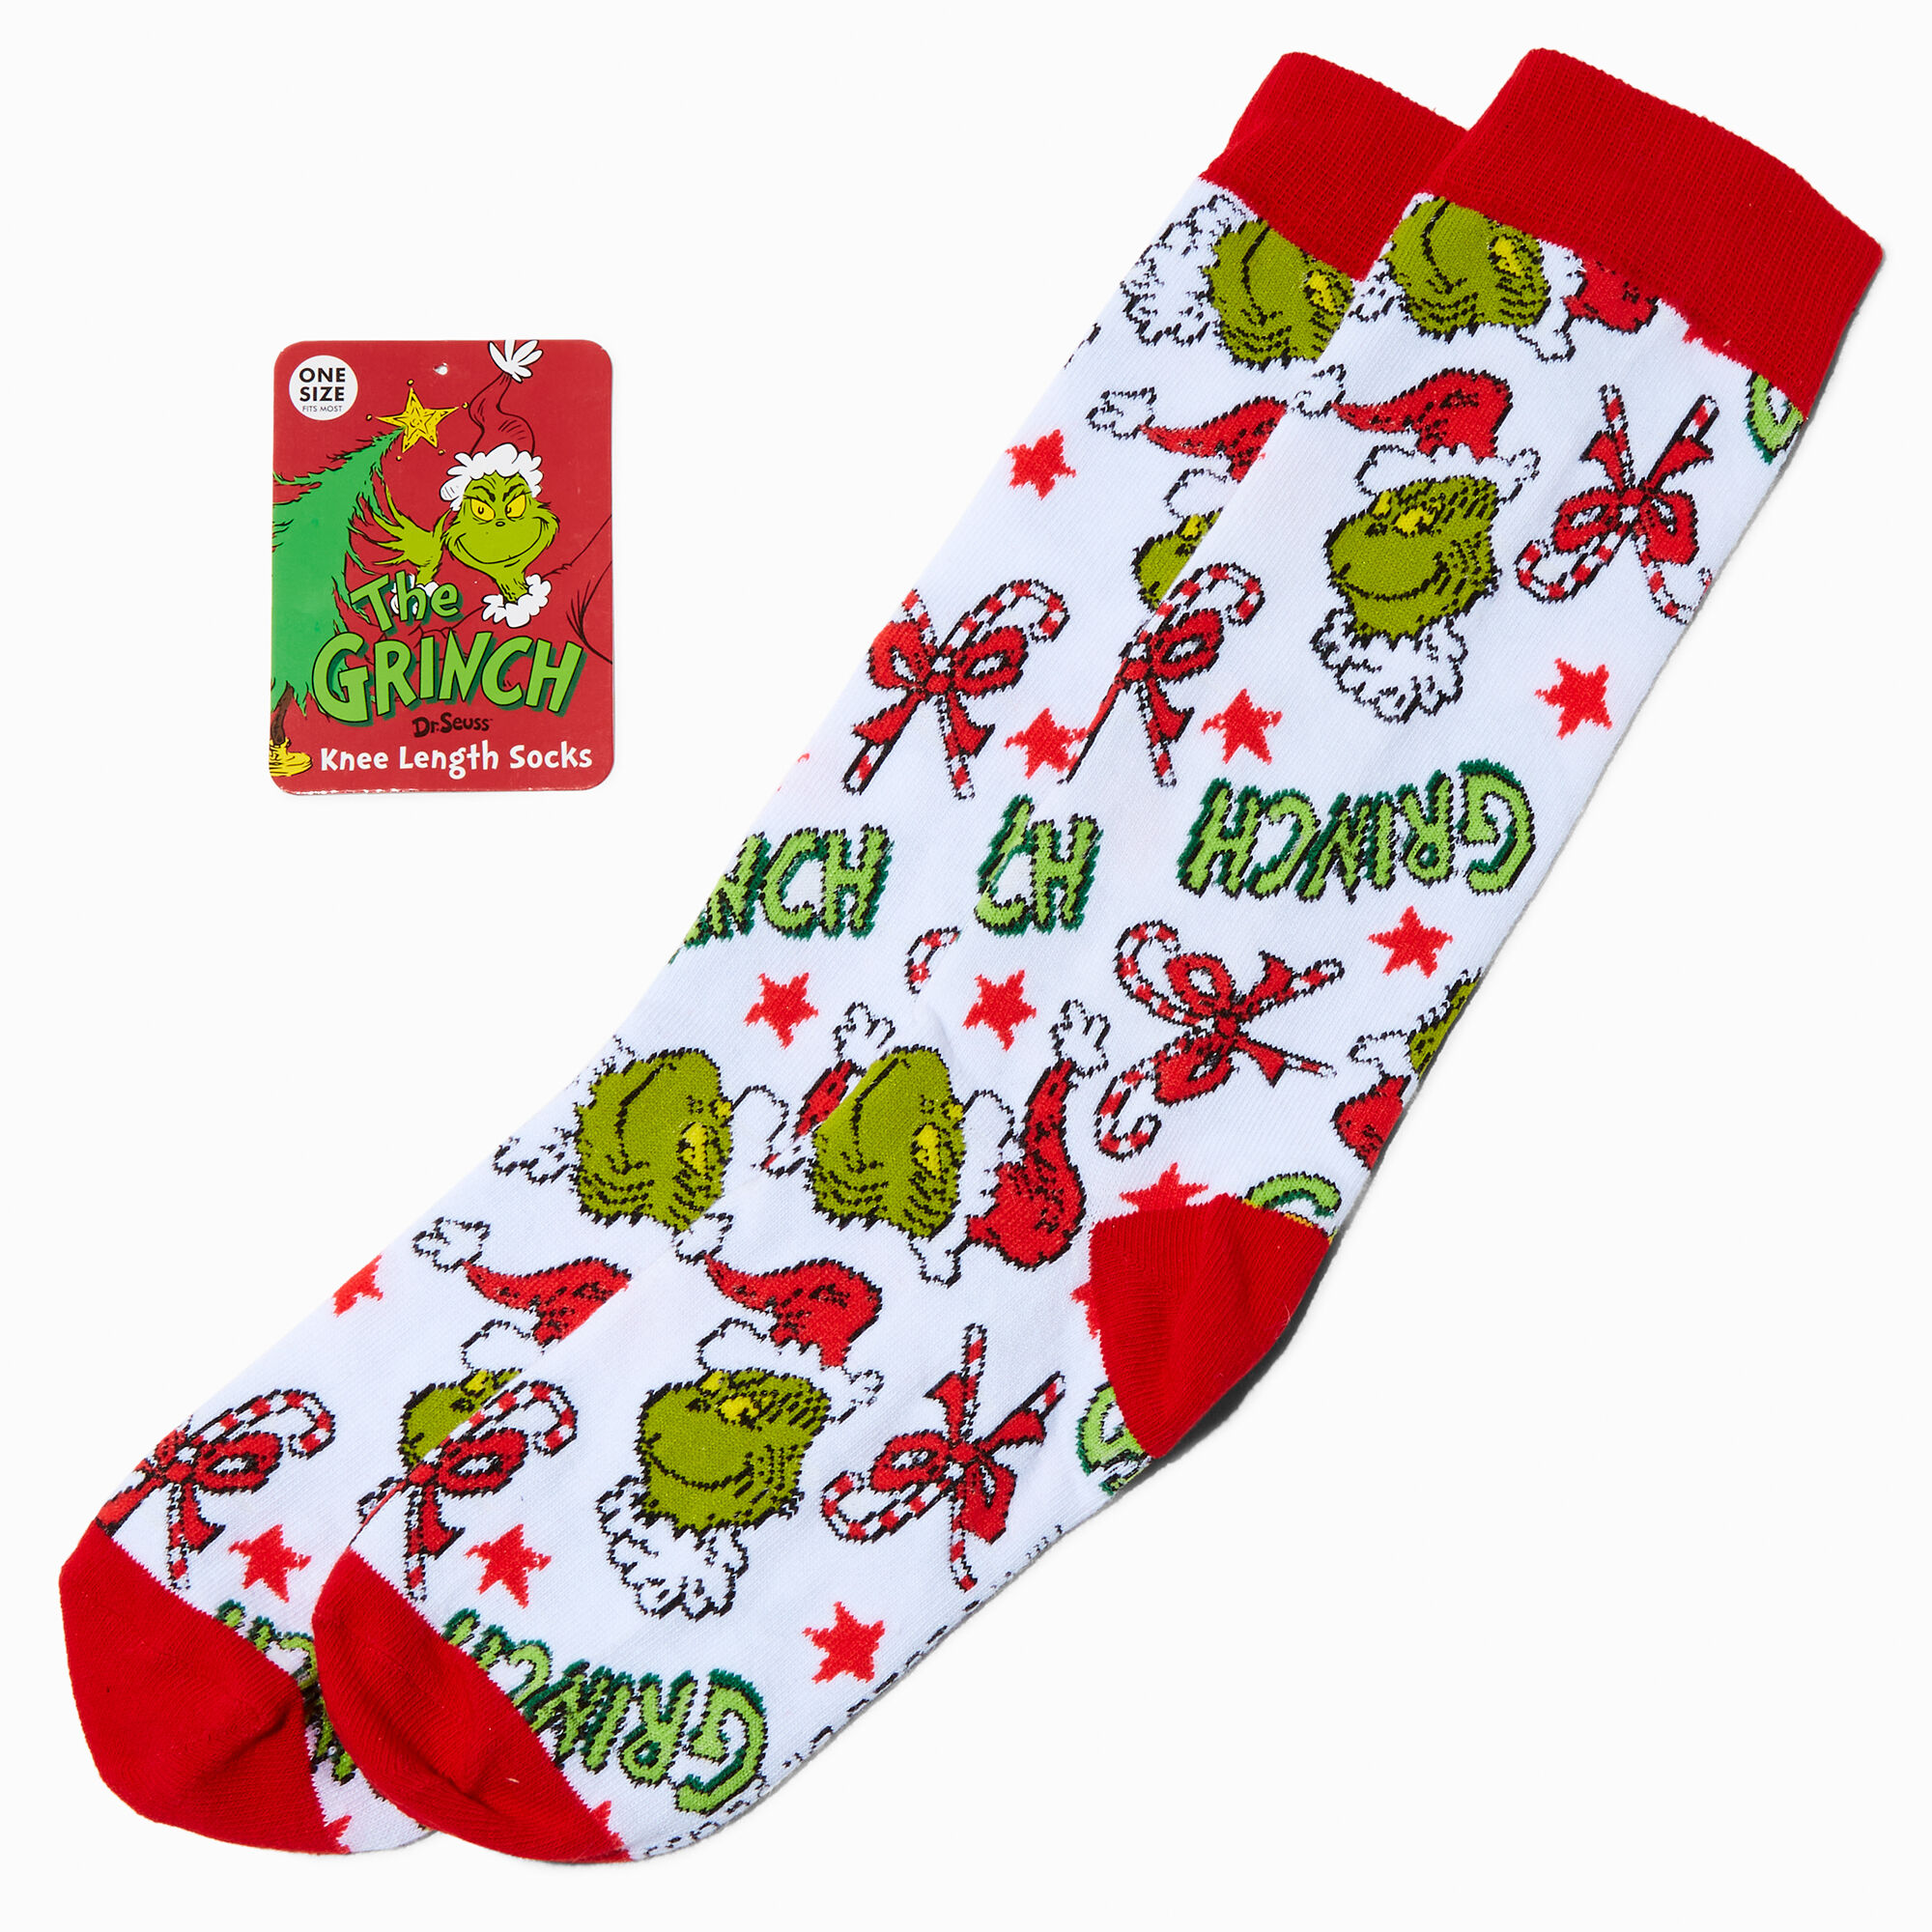 View Claires Dr Seuss The Grinch Knee Socks information